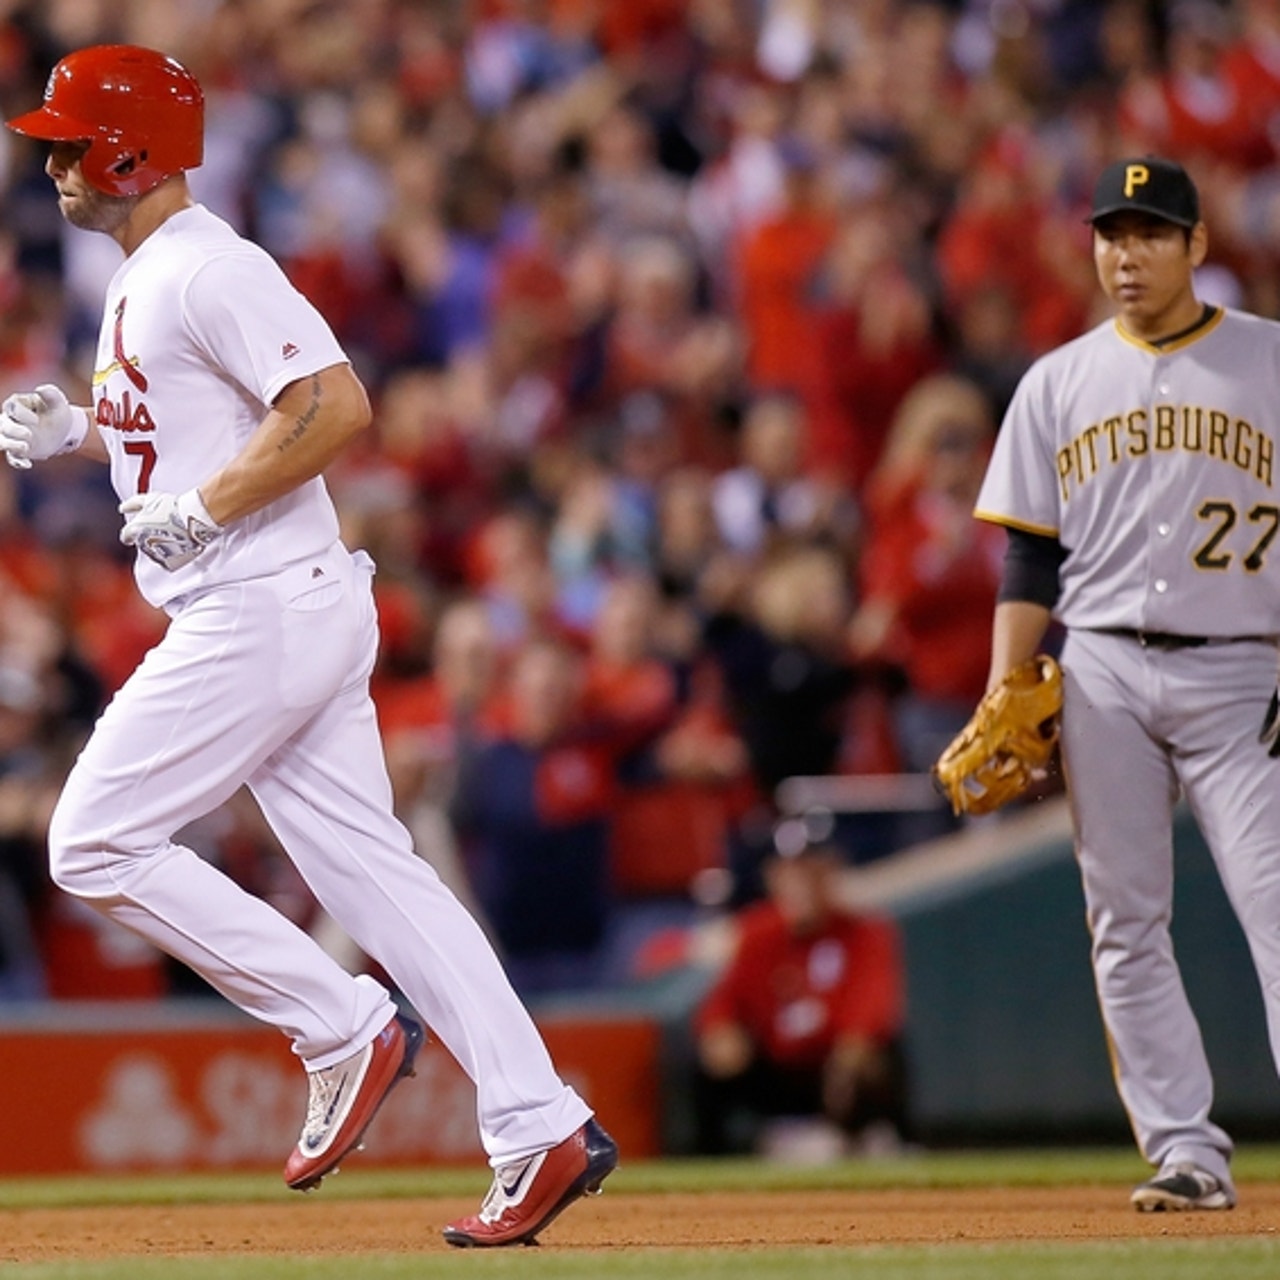 Cardinals move Pujols to cleanup spot